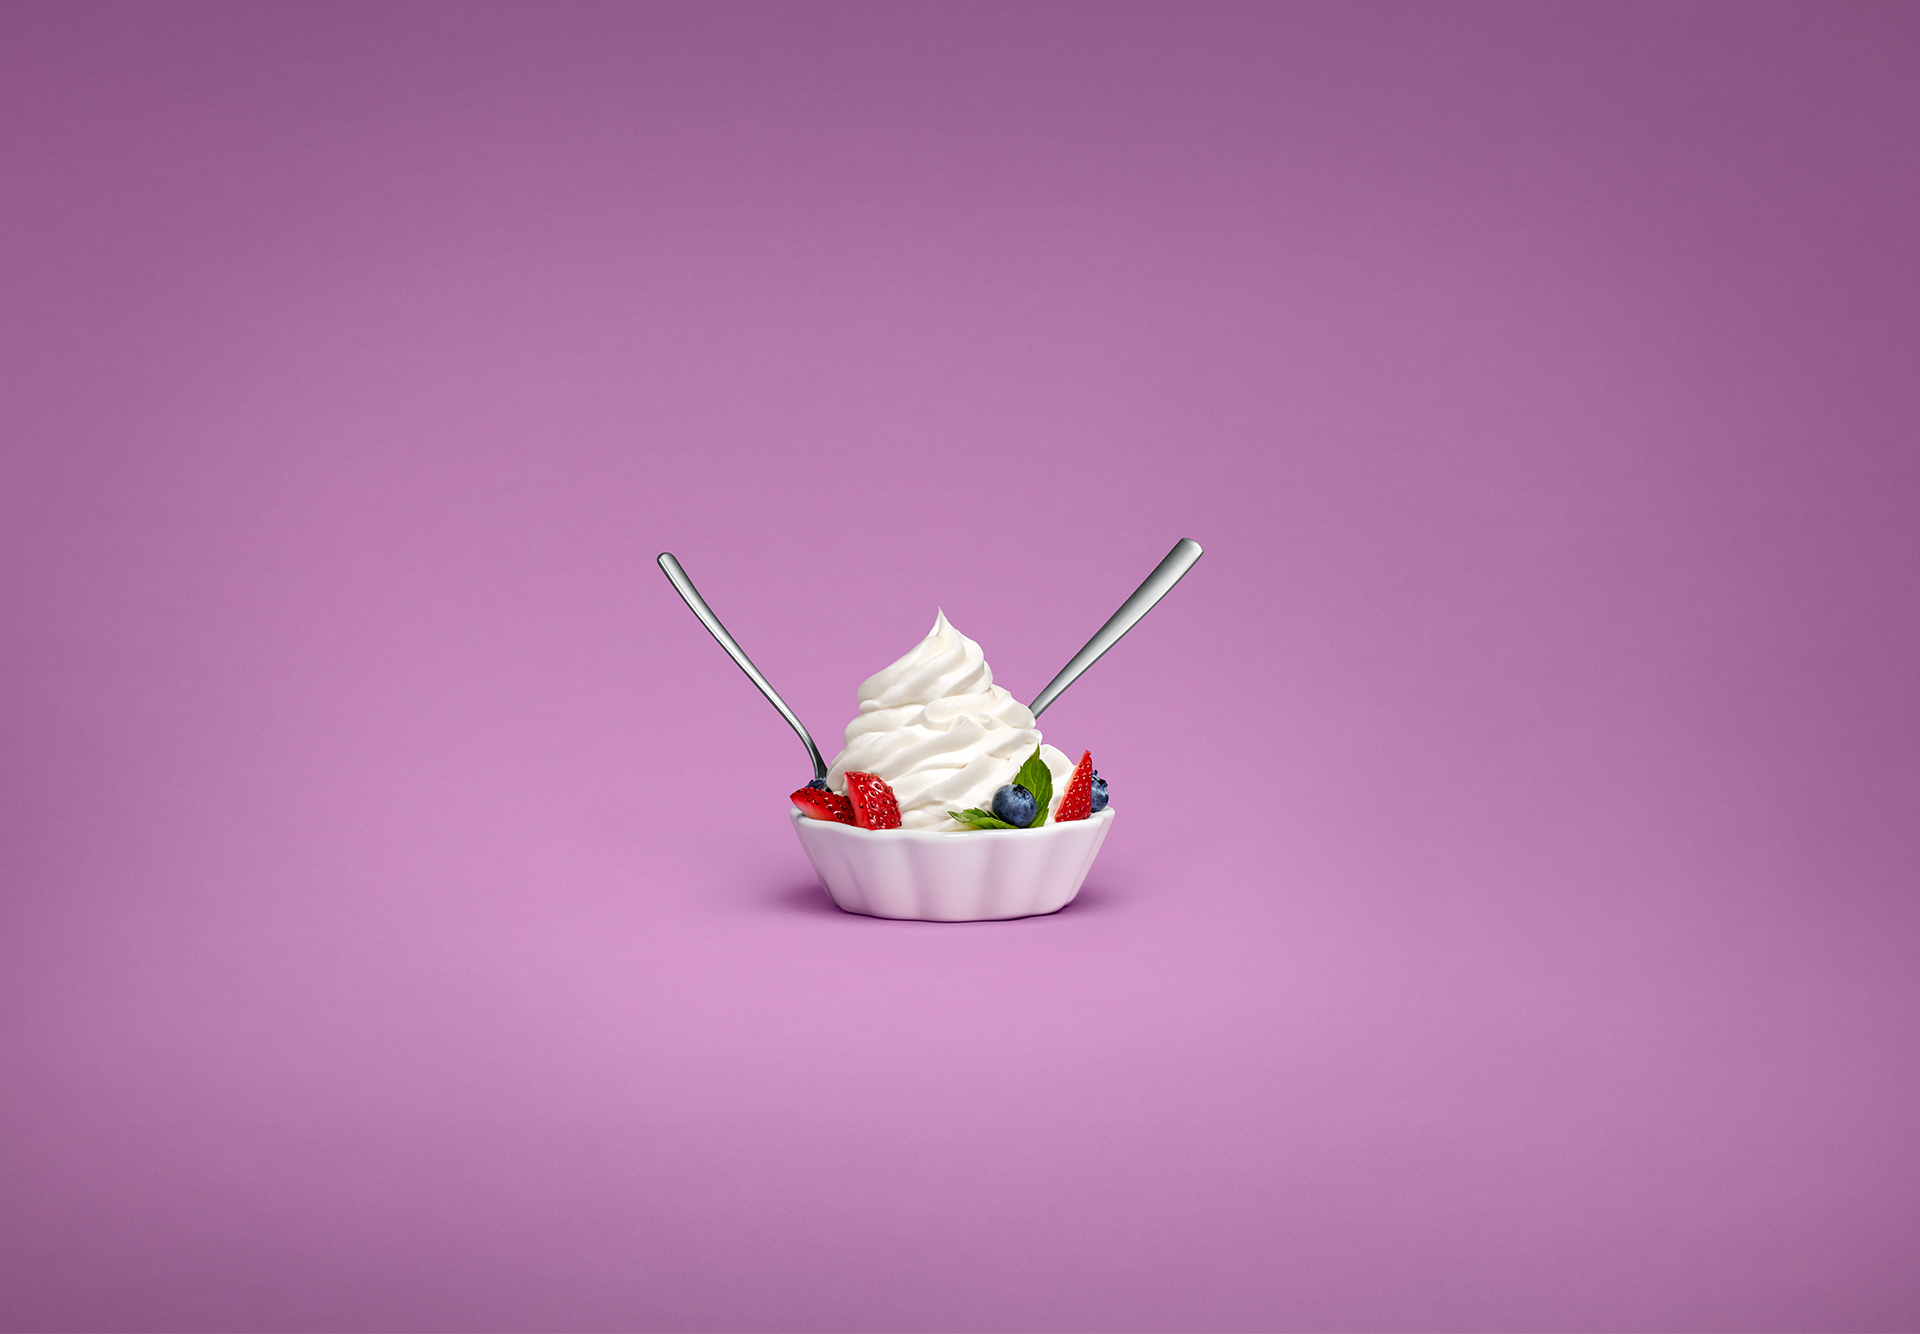 Android Operating System Food Dessert Strawberries Blueberries Mint Leaves Sweets 1920x1334